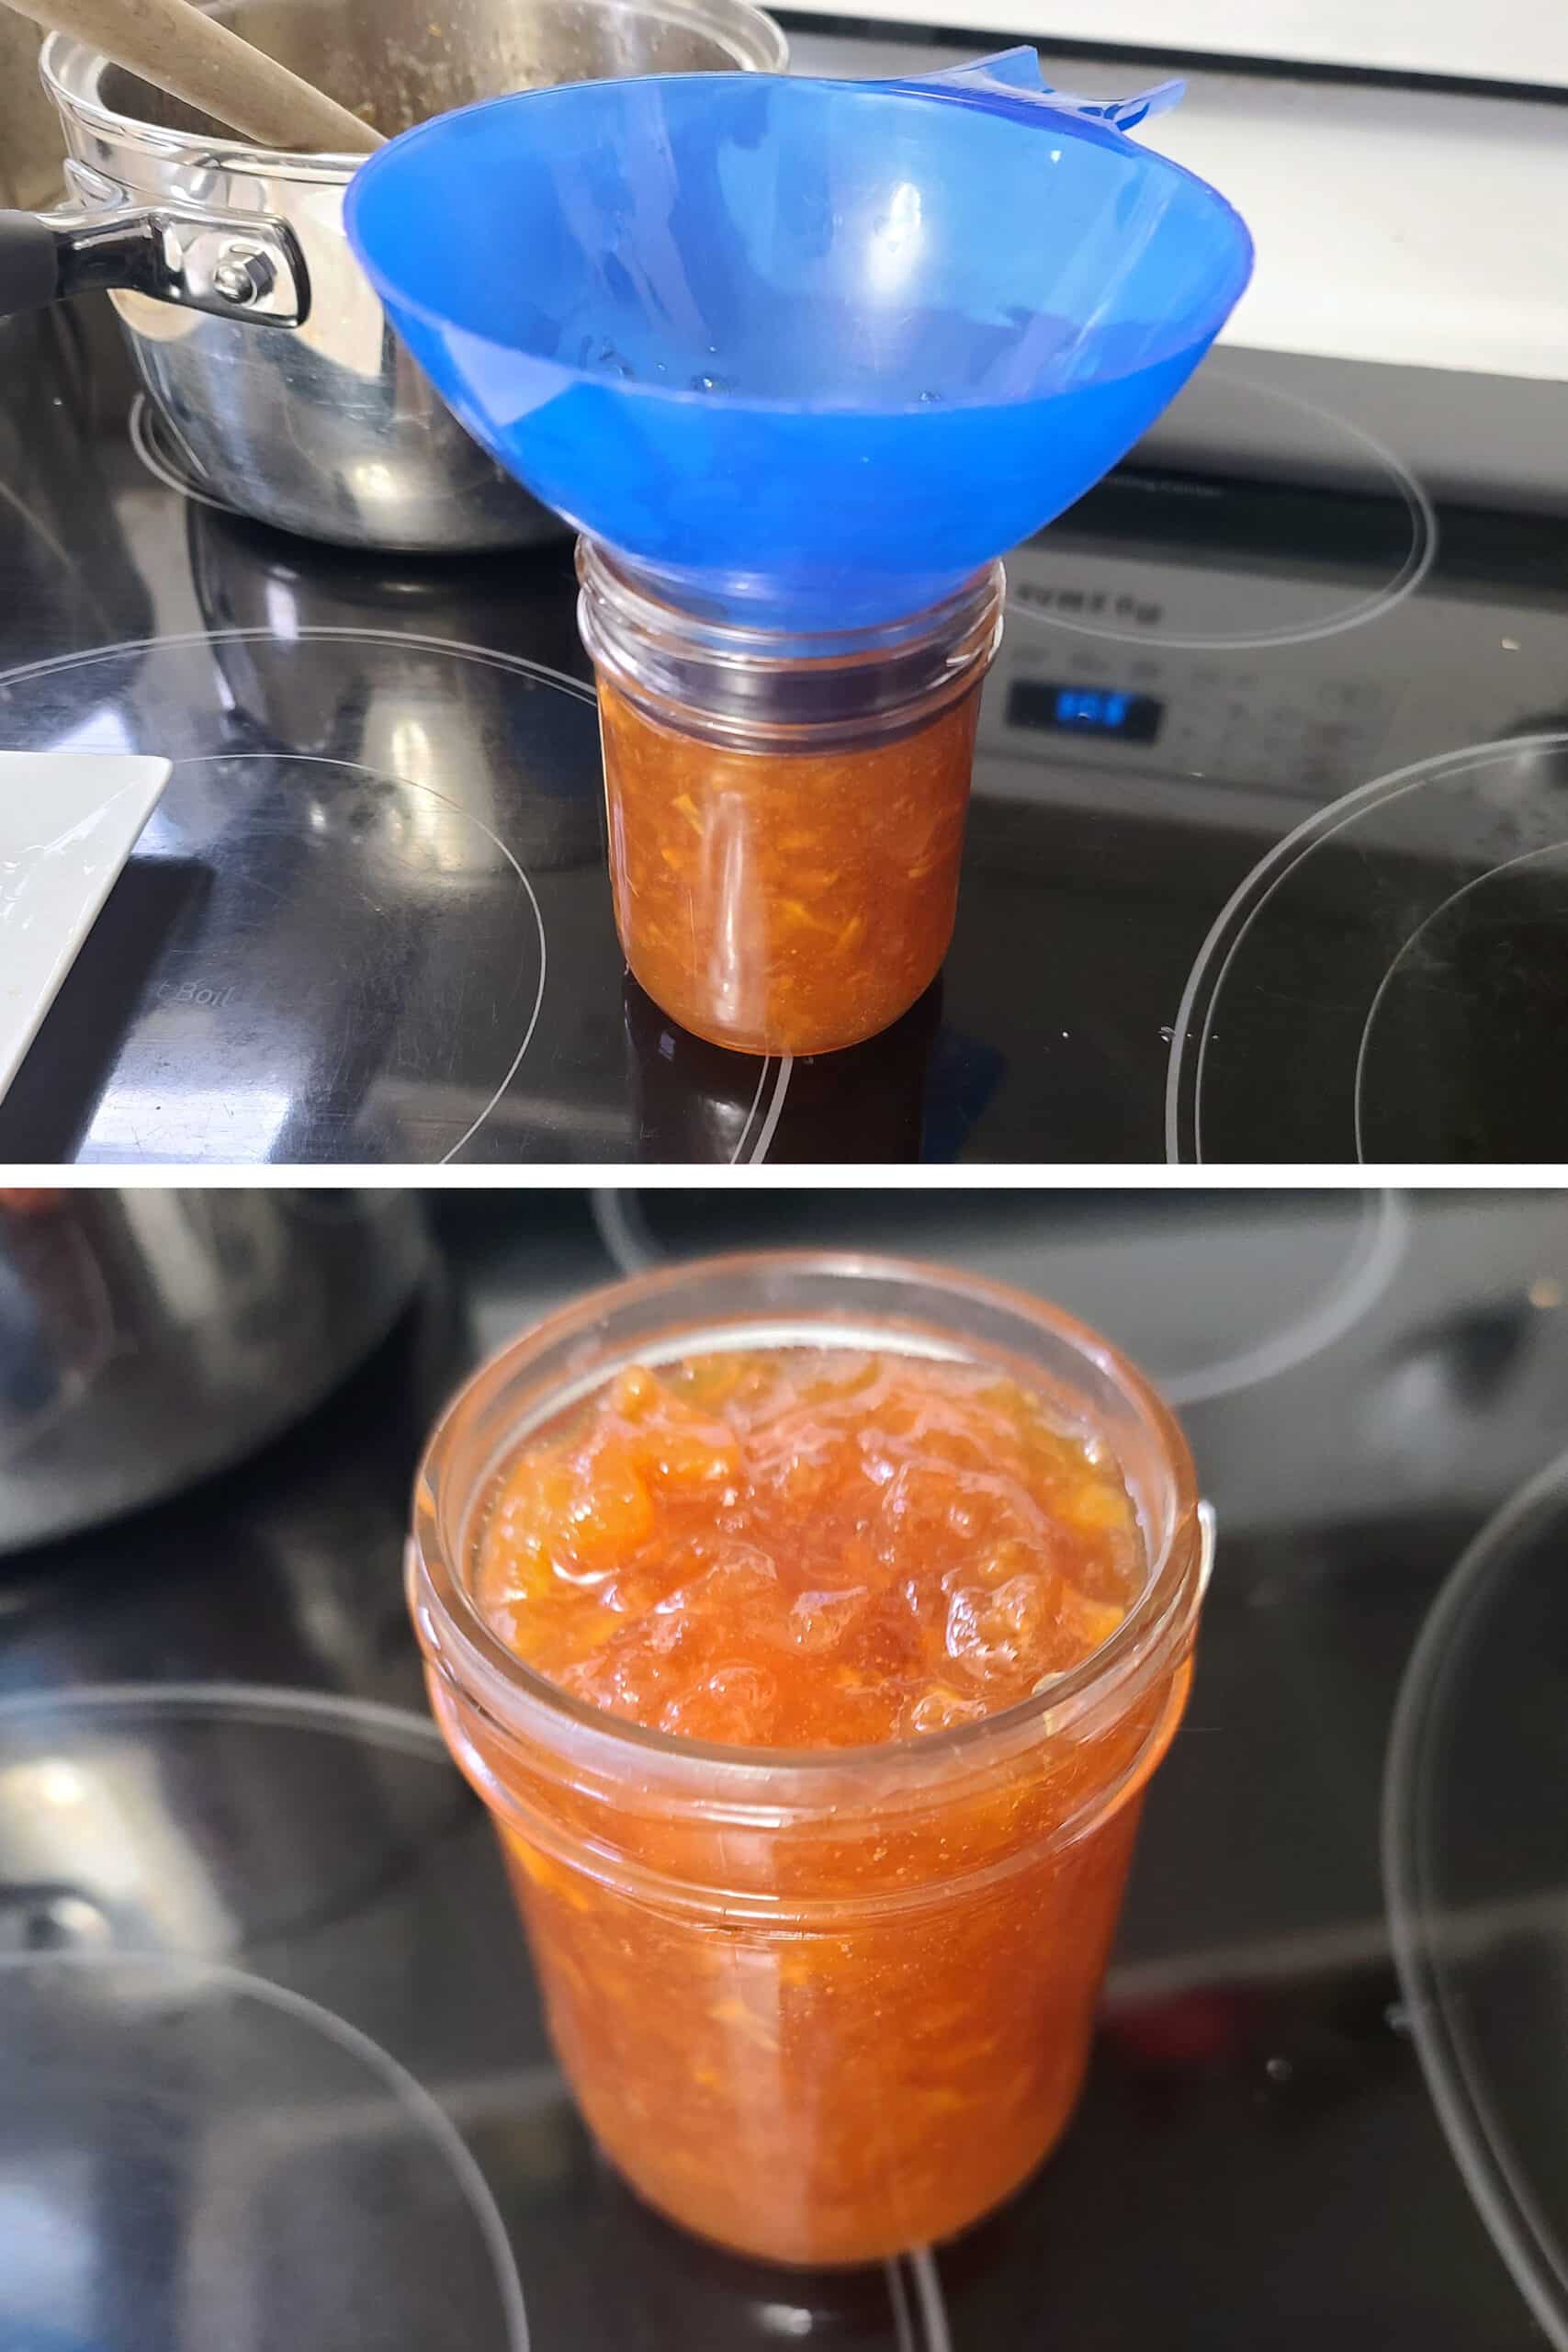 A 2 part image showing the jam being poured into a jar, using a blue funnel.